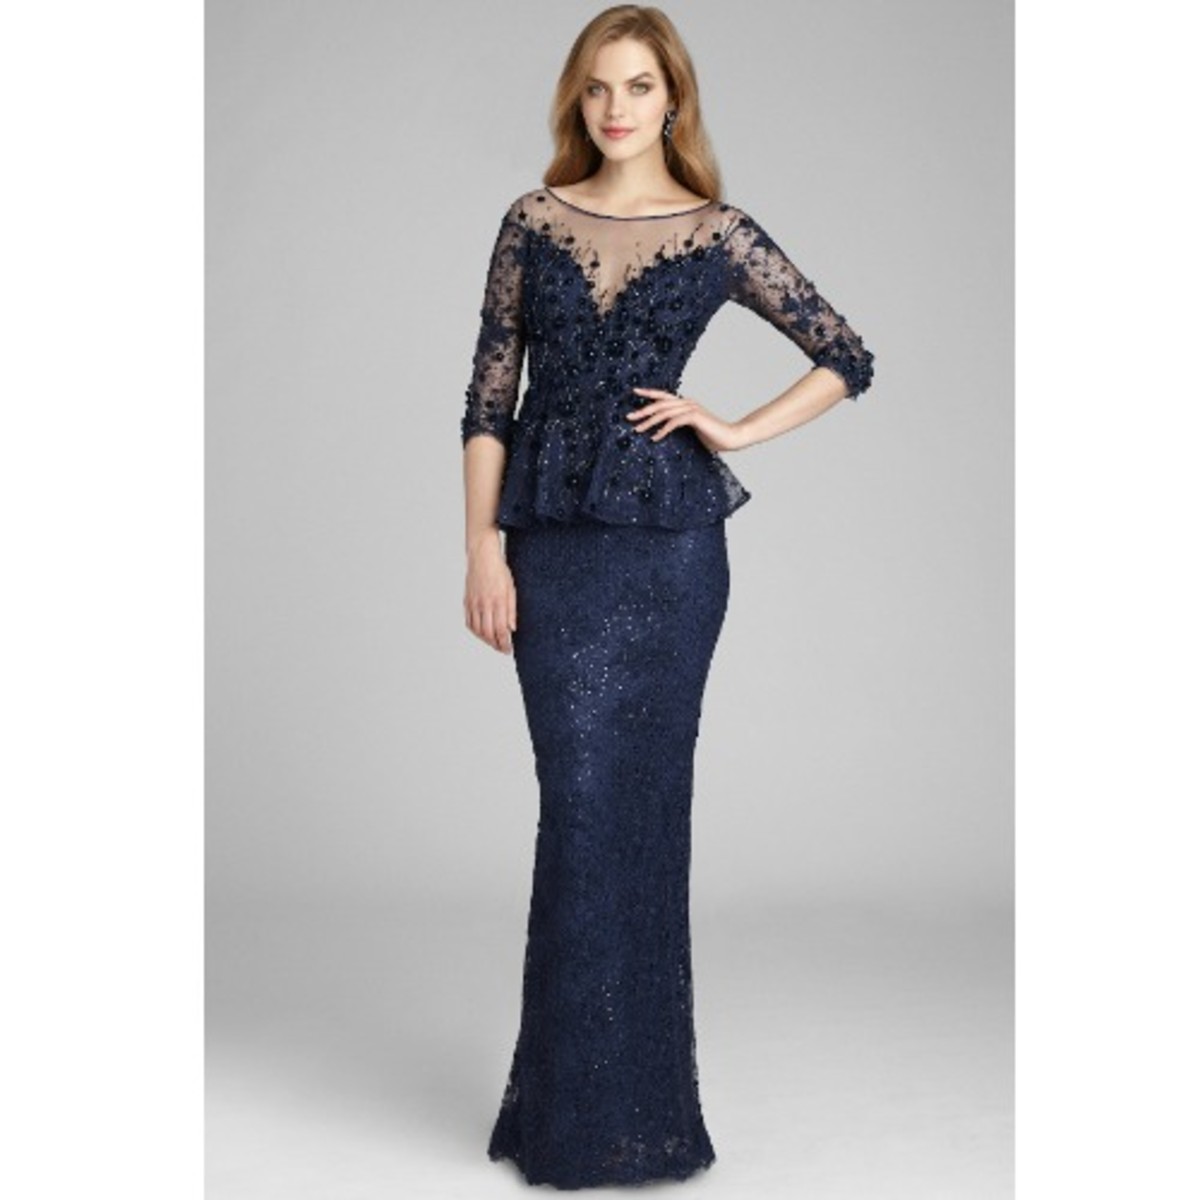 Teri Jon Lace Peplum Gown with Floral 